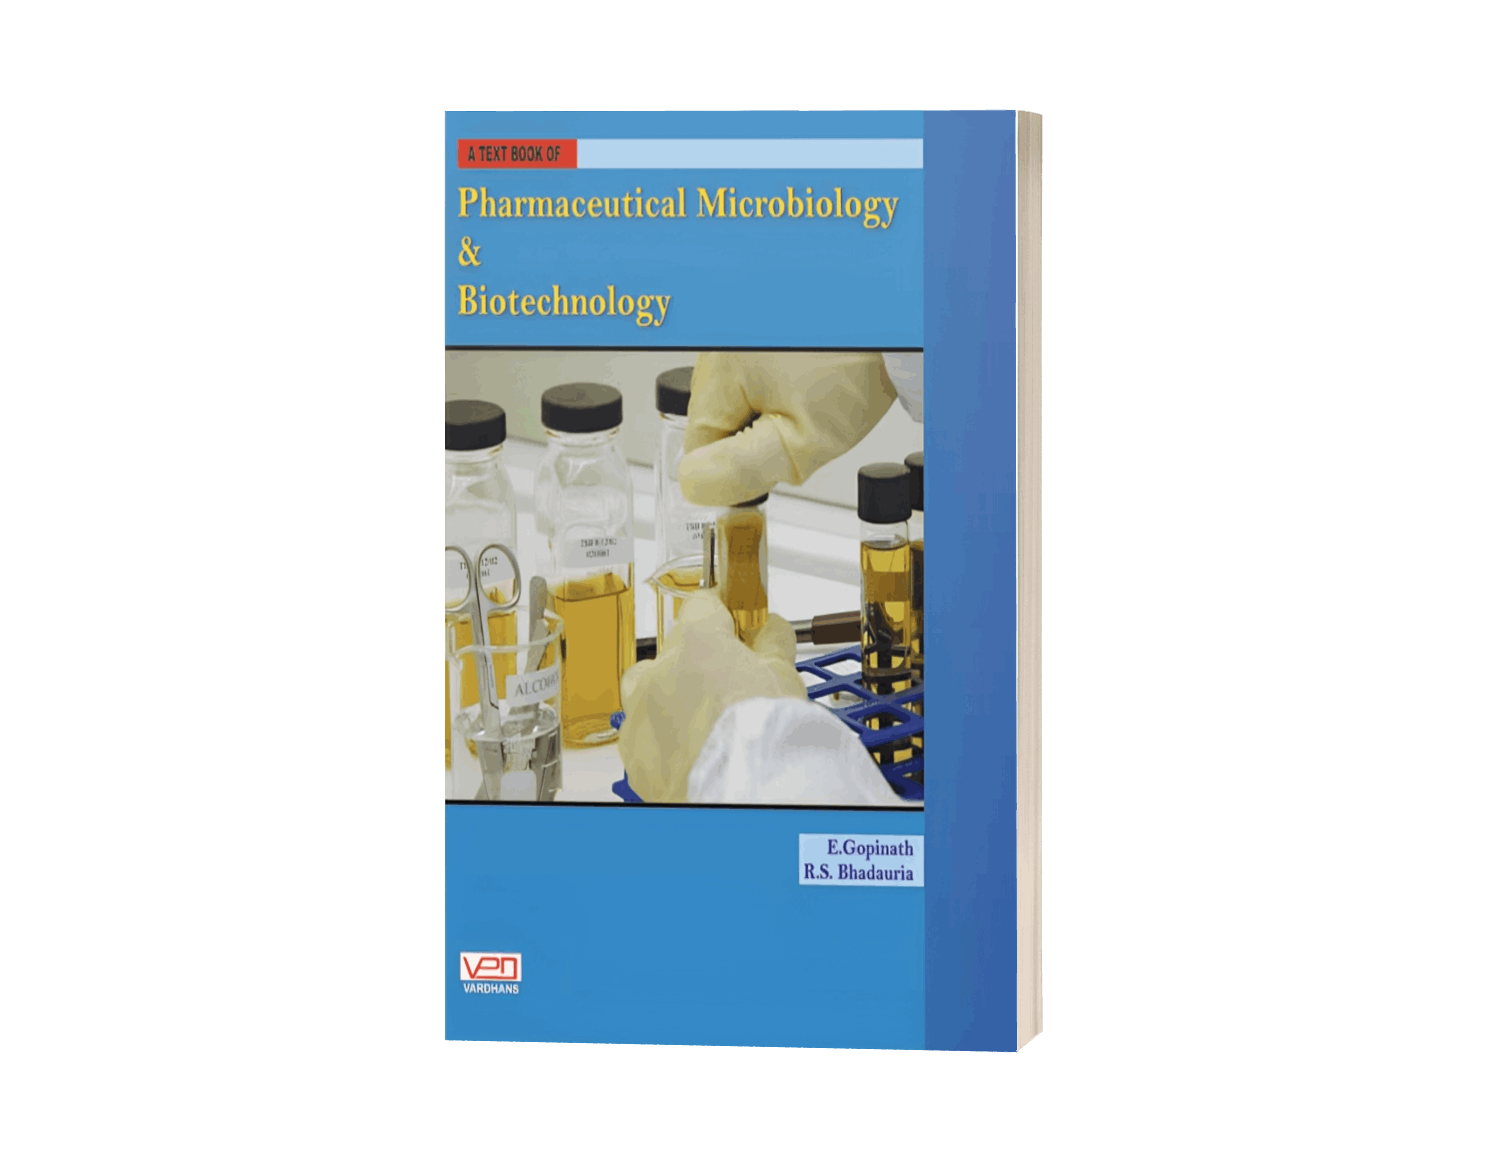 Pharmaceutical Microbiology & Biotechnology